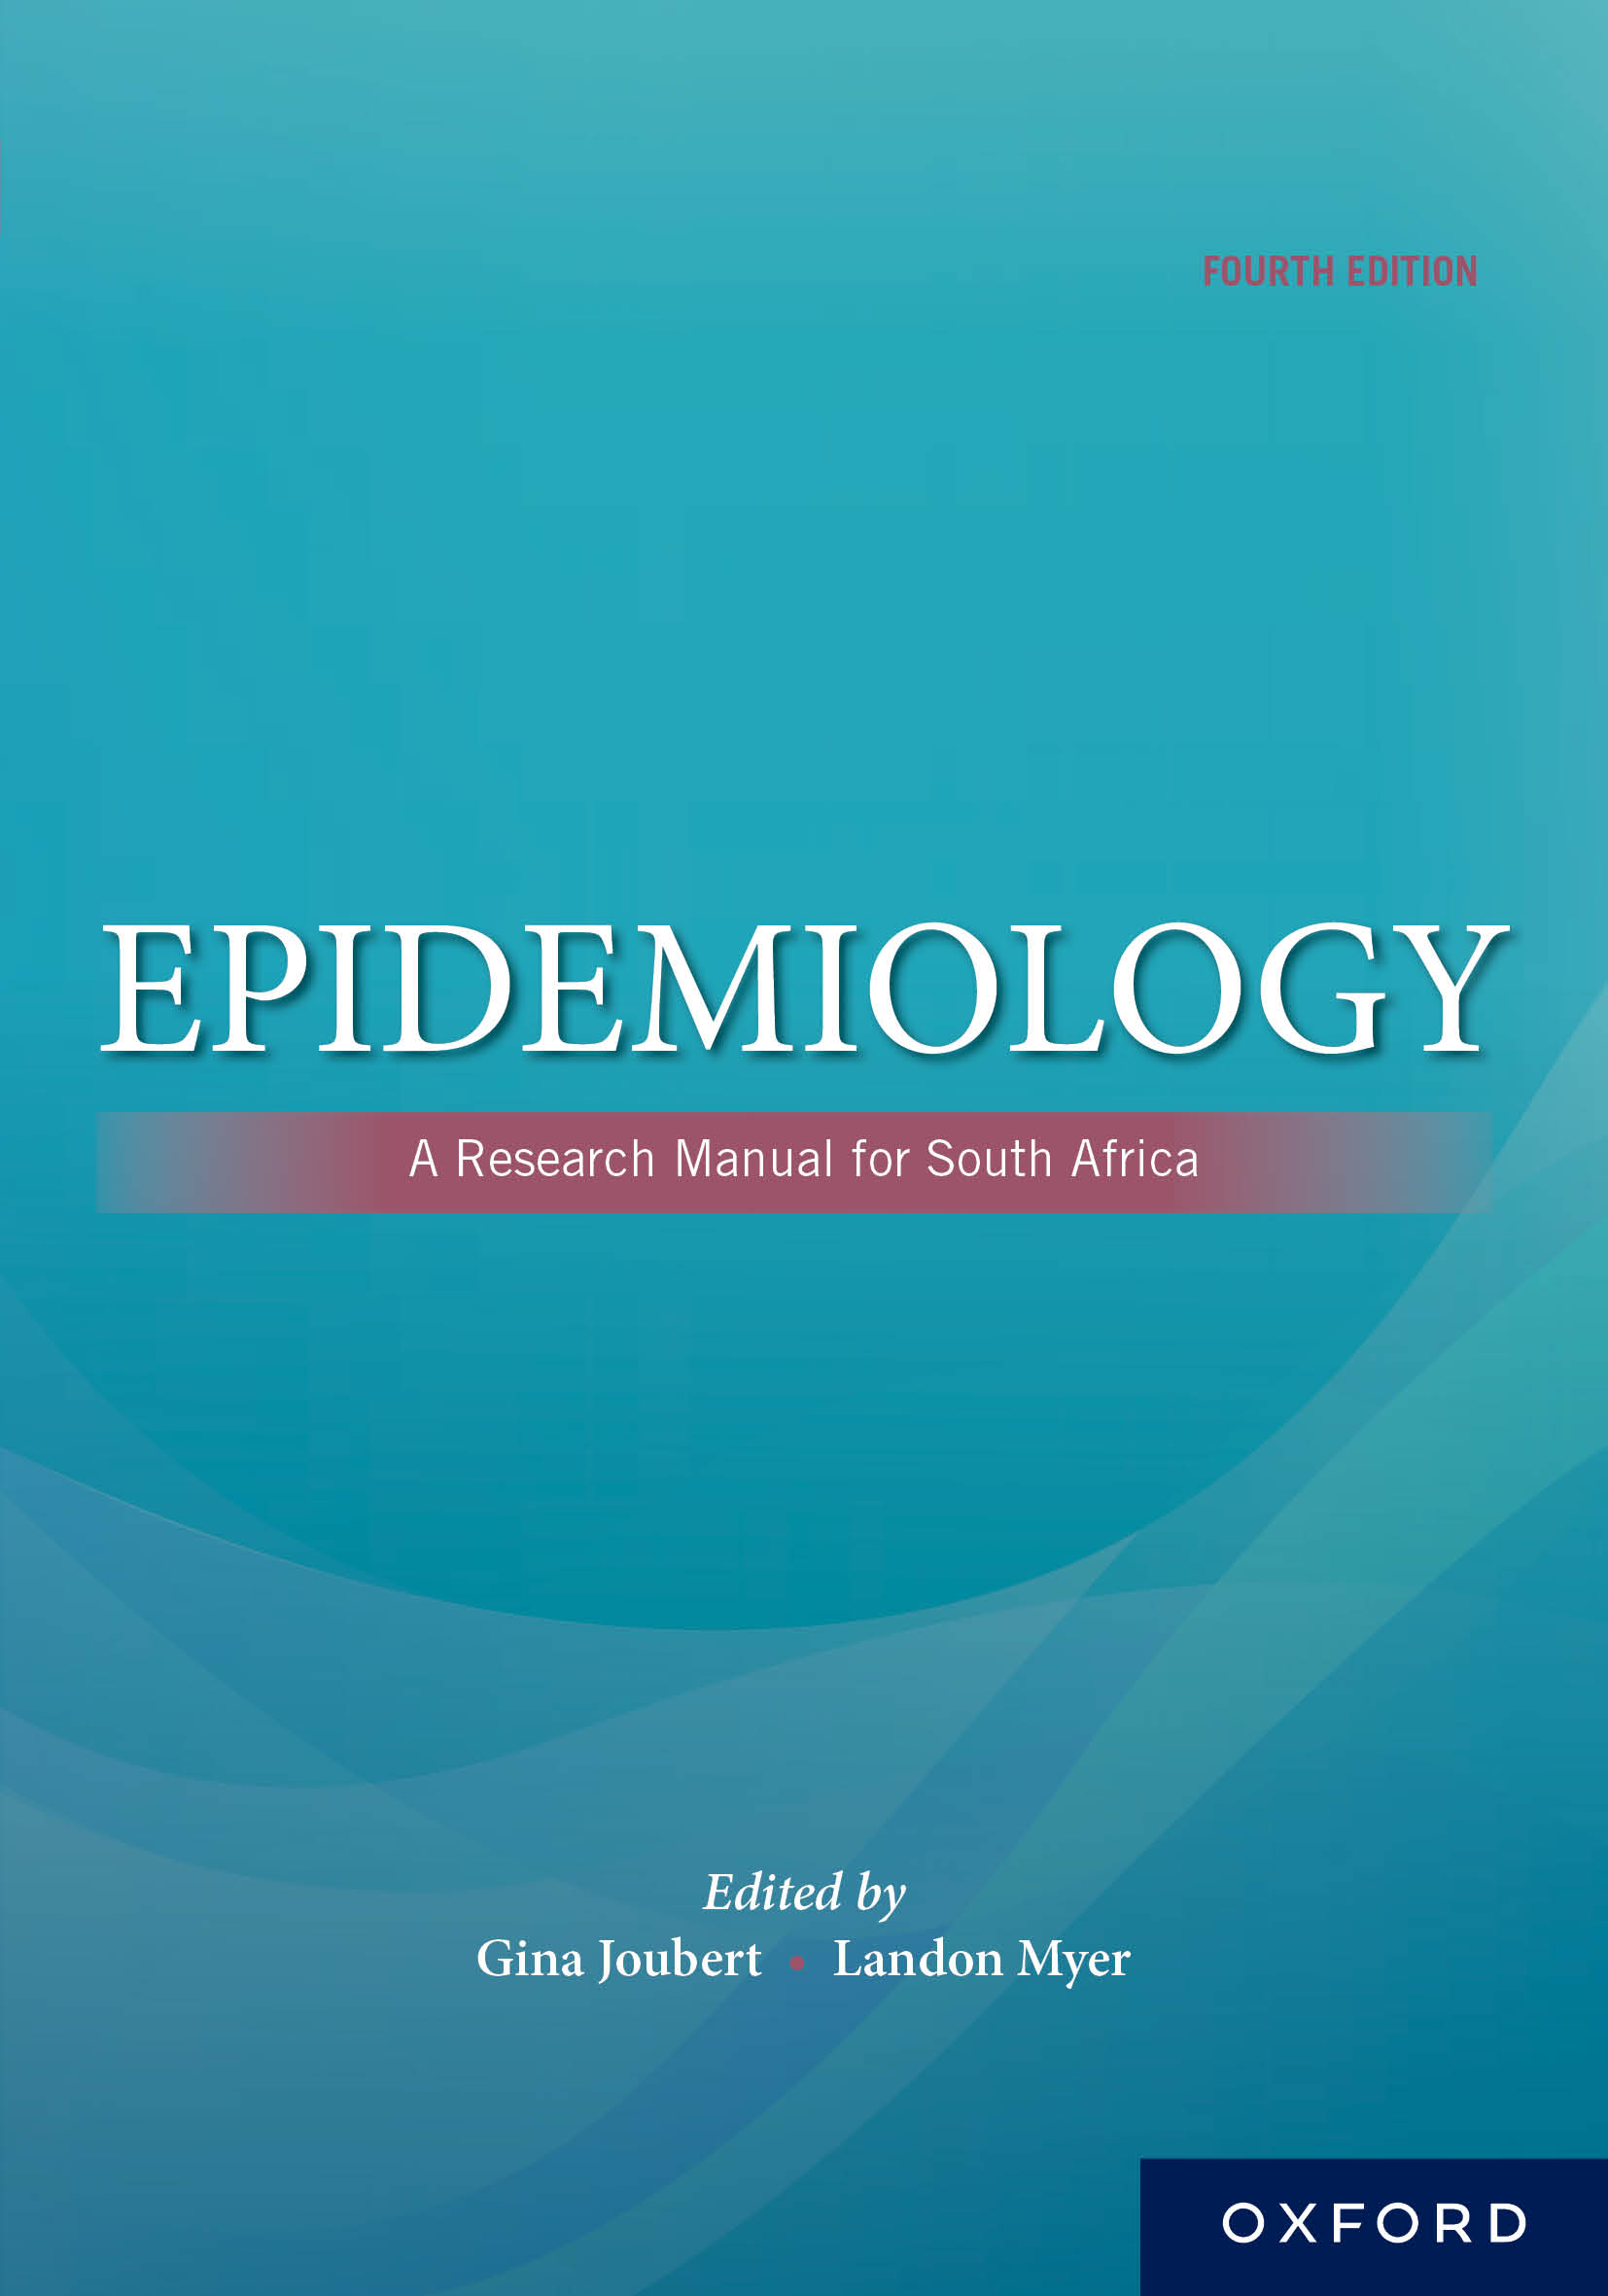 Epidemiology: a Research Manual for Africa